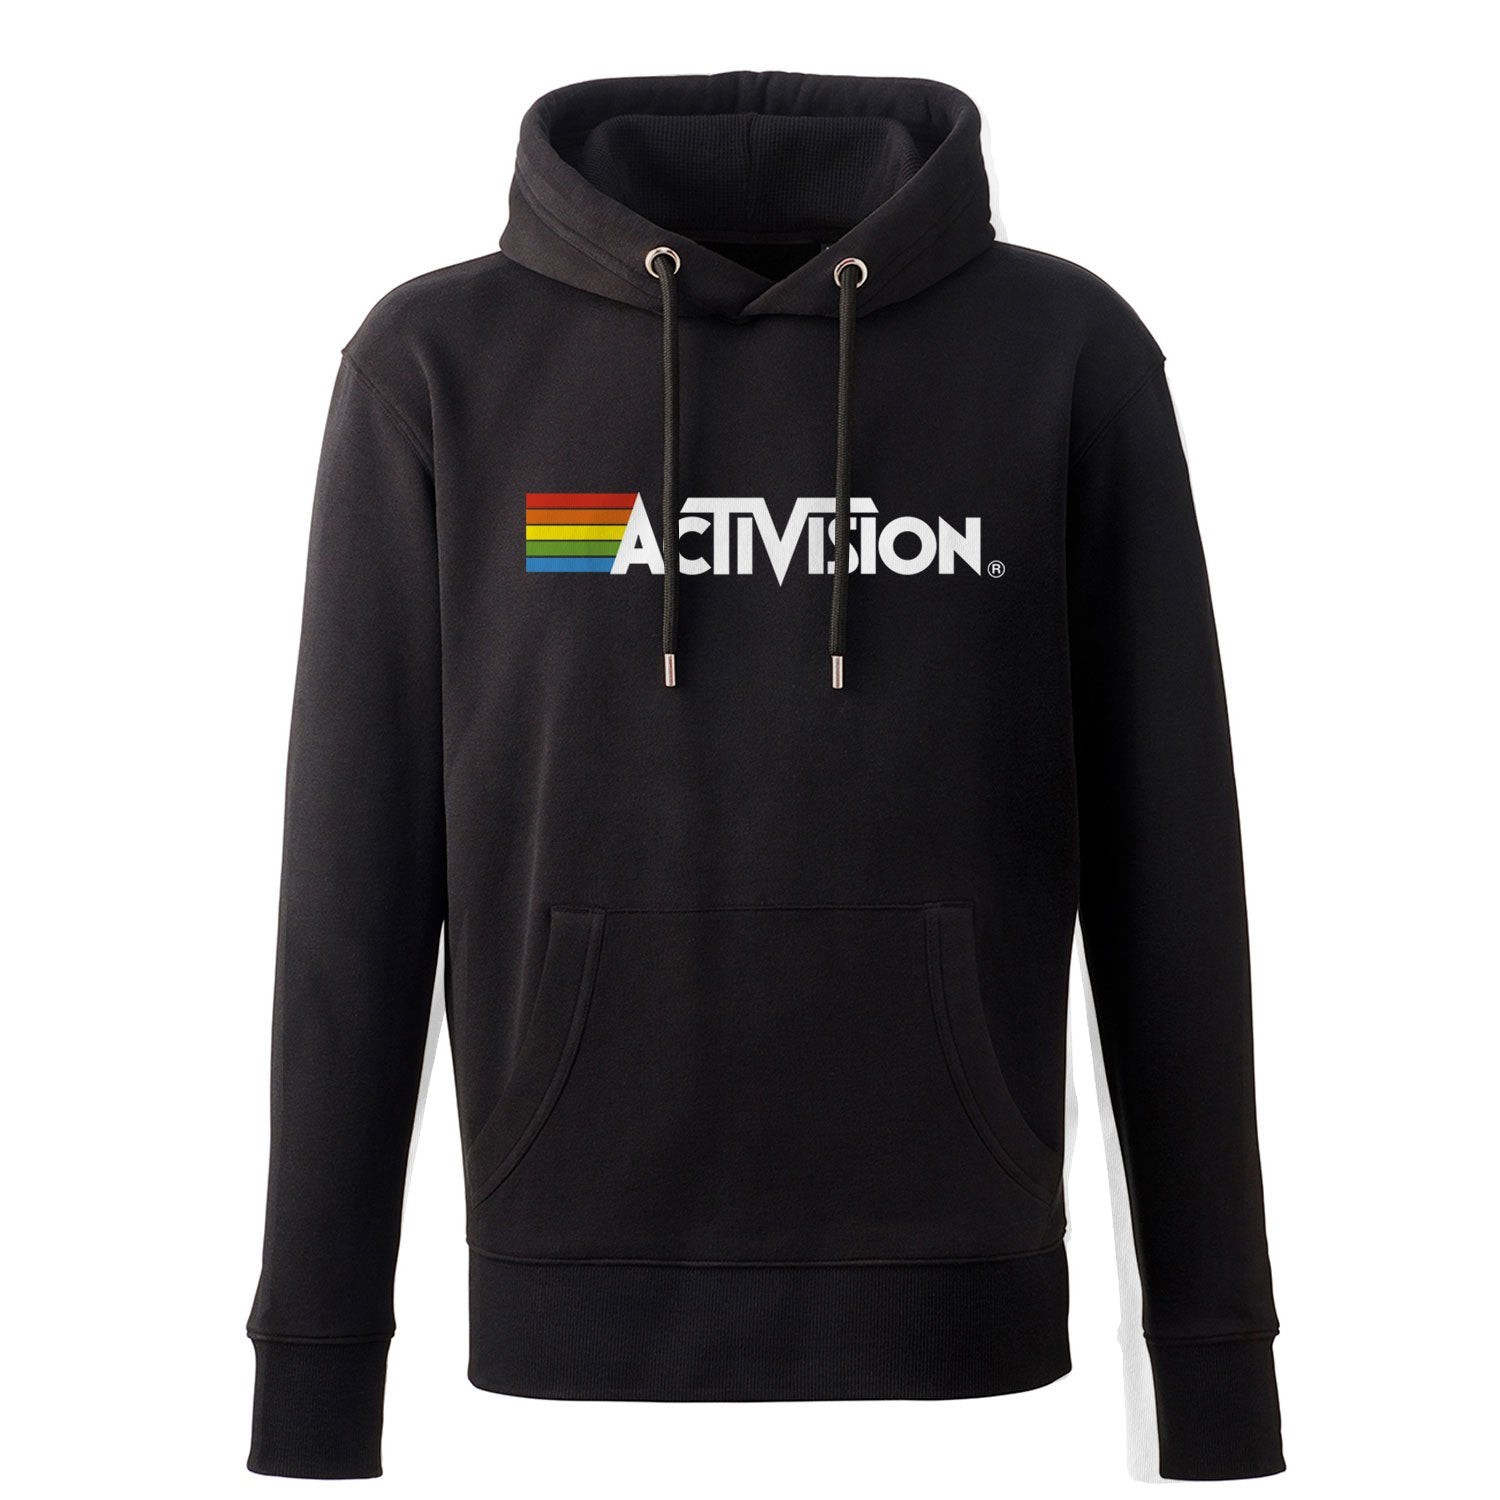 Activision Logo Men's Hoody, Black Pullover in Unisex Fit with Kangaroo Pocket